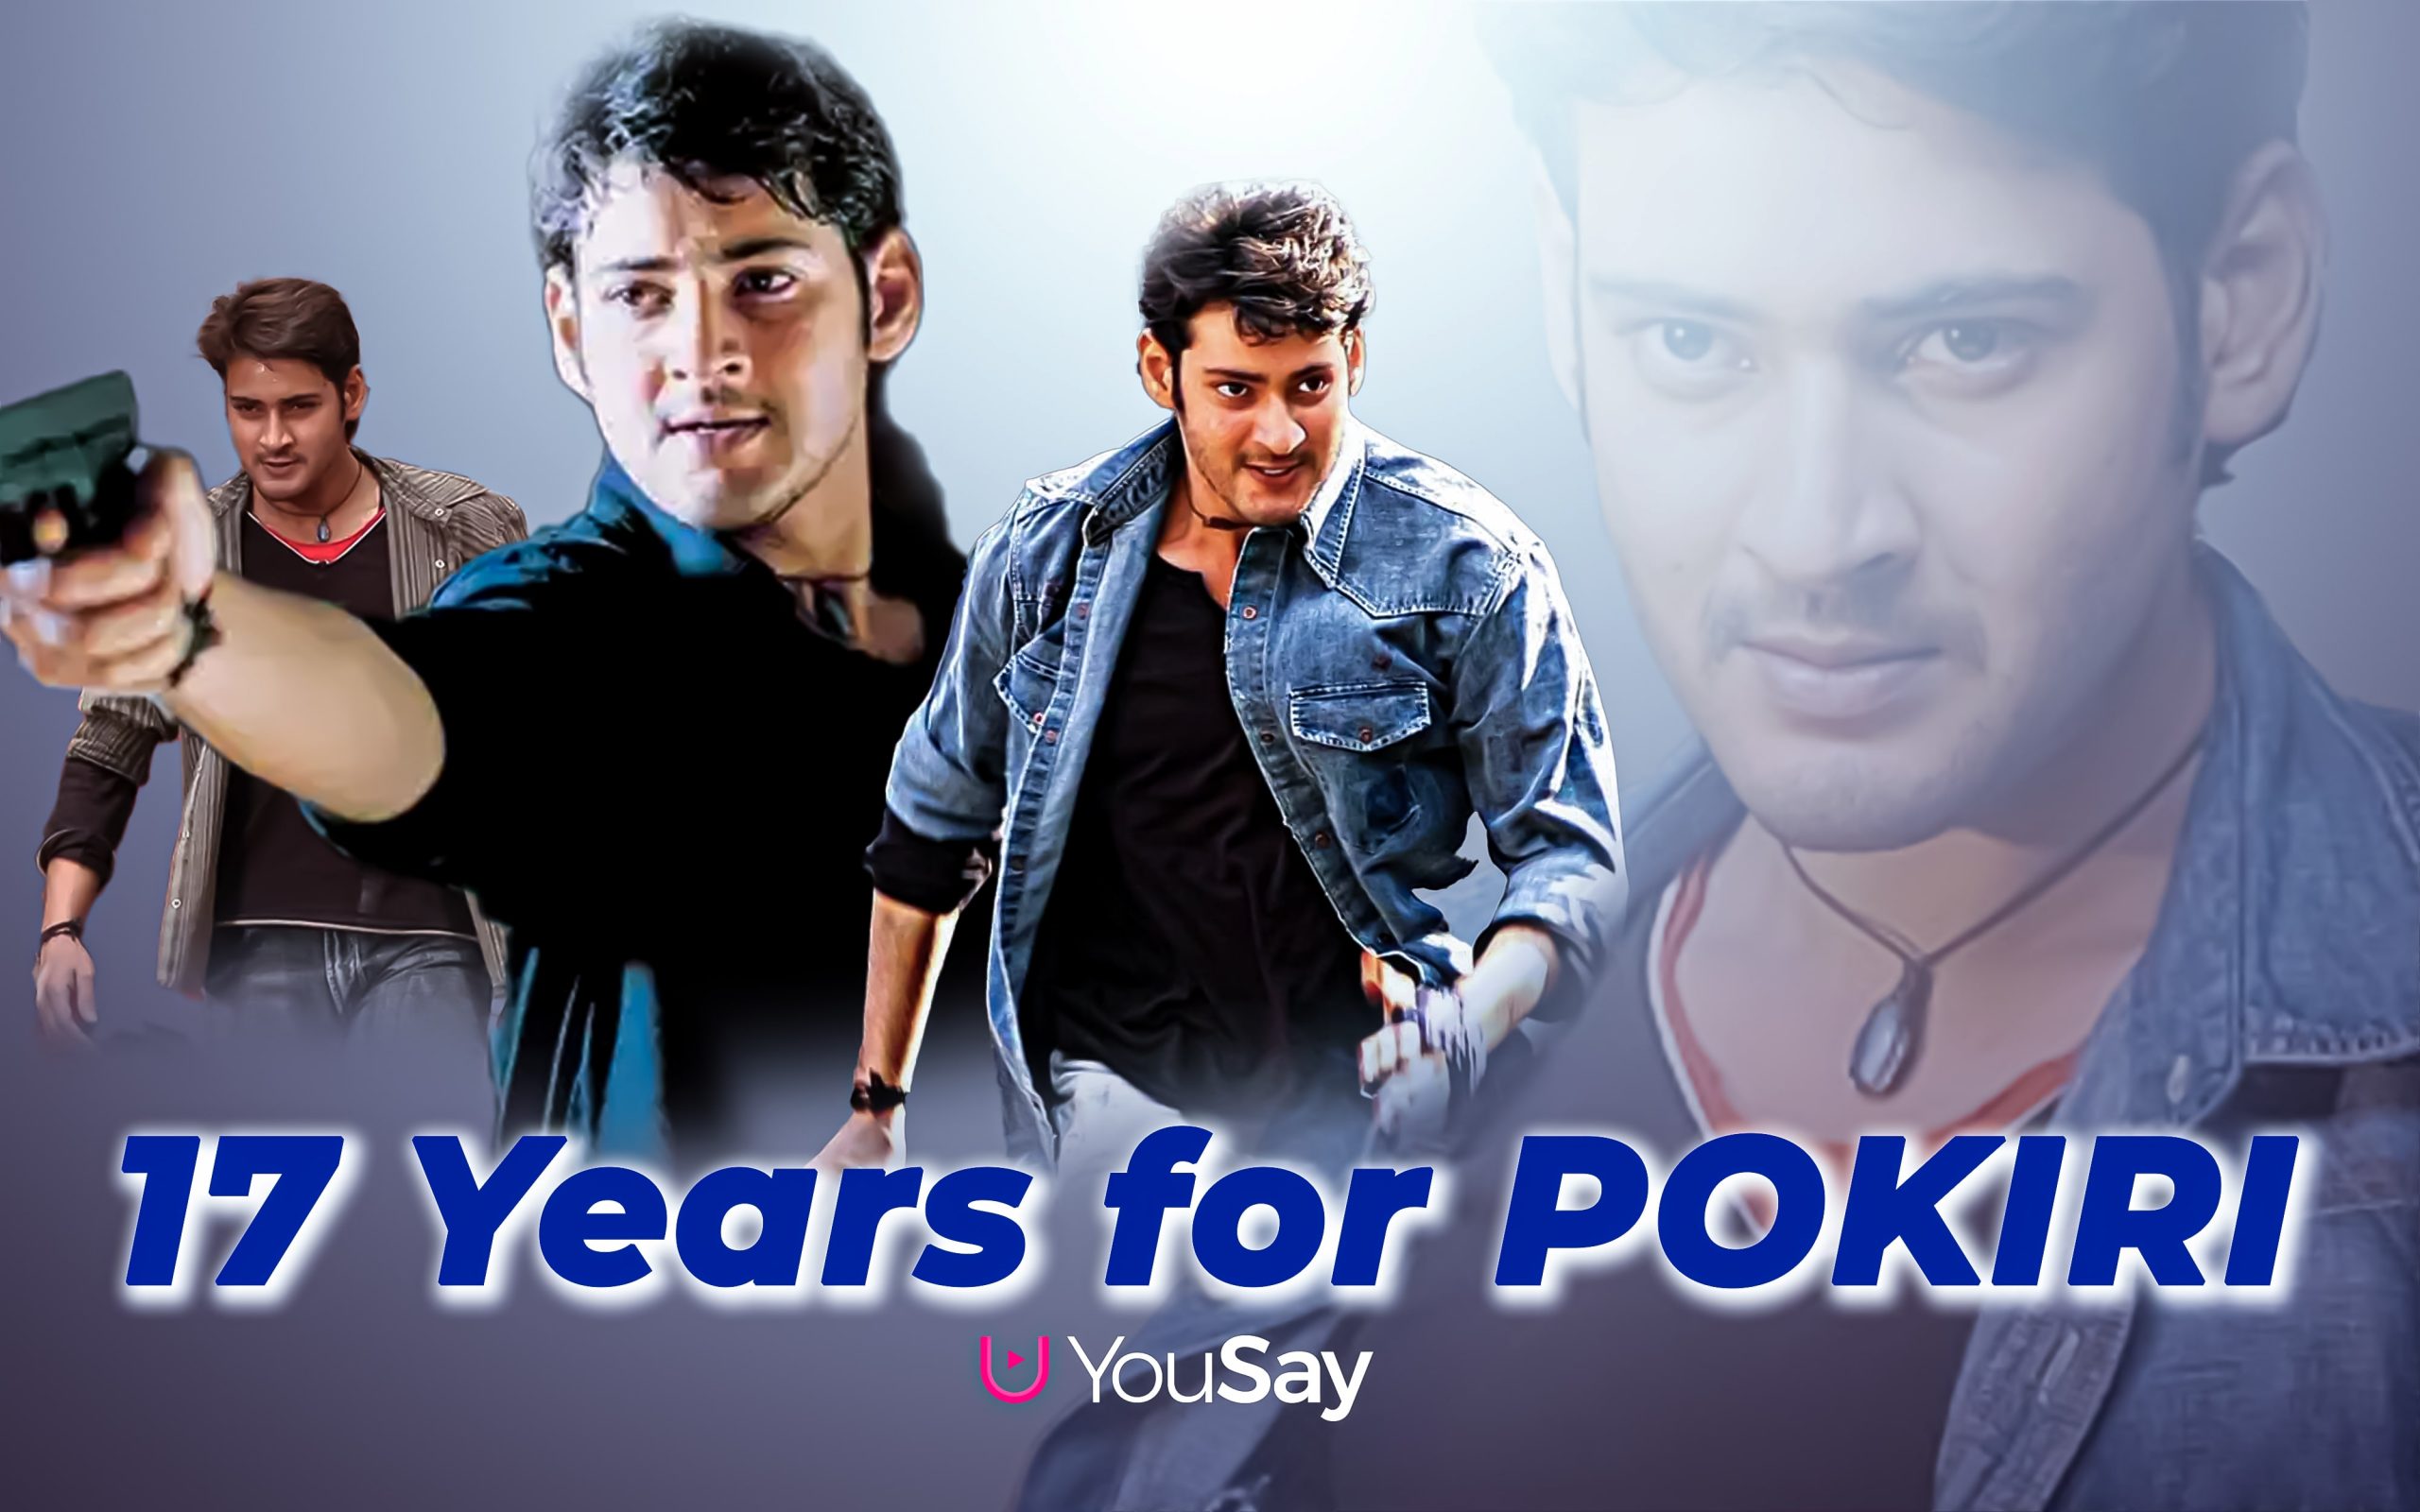 Celebrating 17 Years of POKIRI: The Unique Factors Behind This Trendsetting Industry Hit